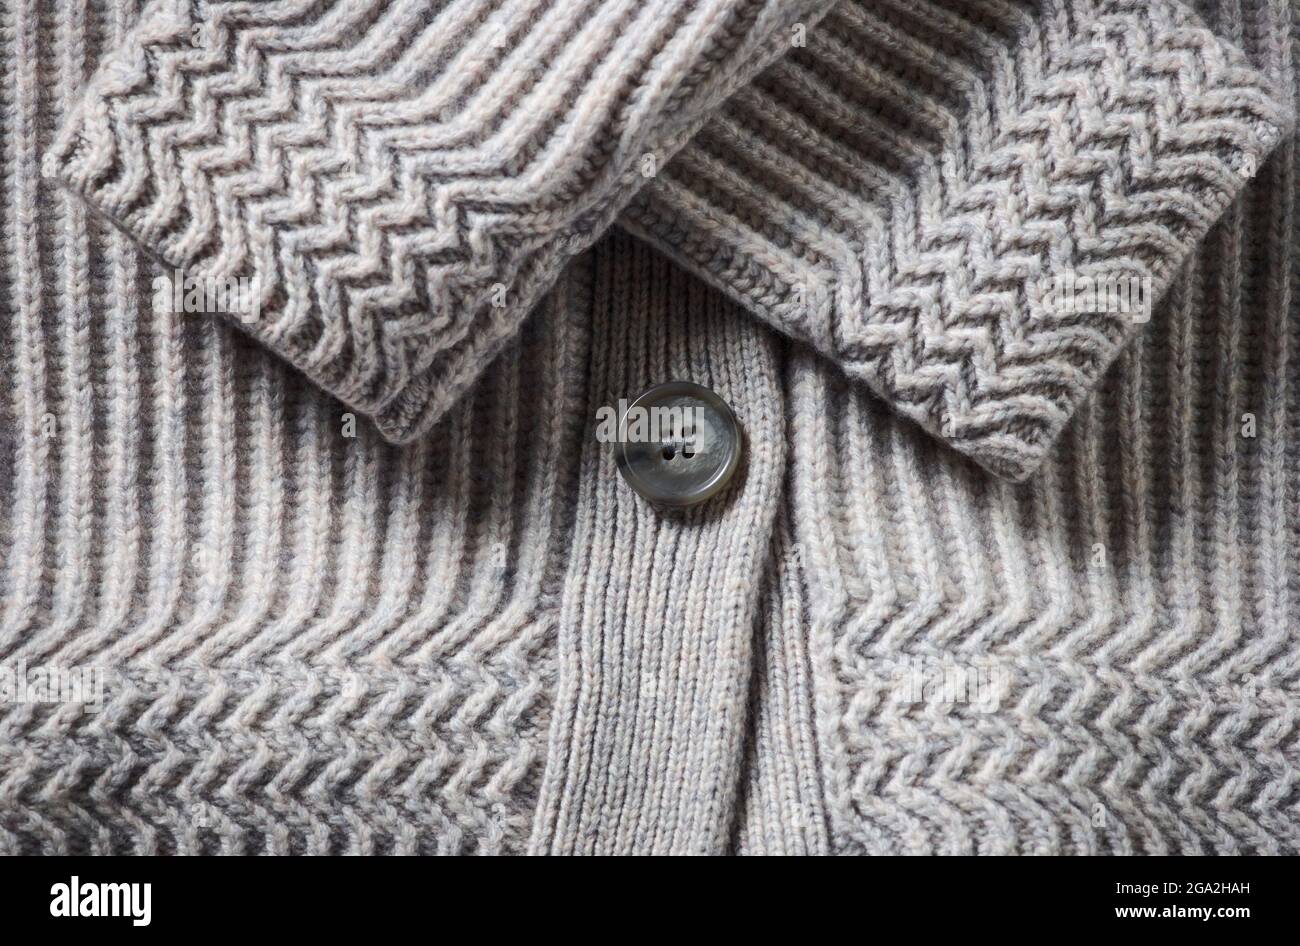 Extreme close-up of the cuffs and button on a grey knit sweater; Studio Stock Photo